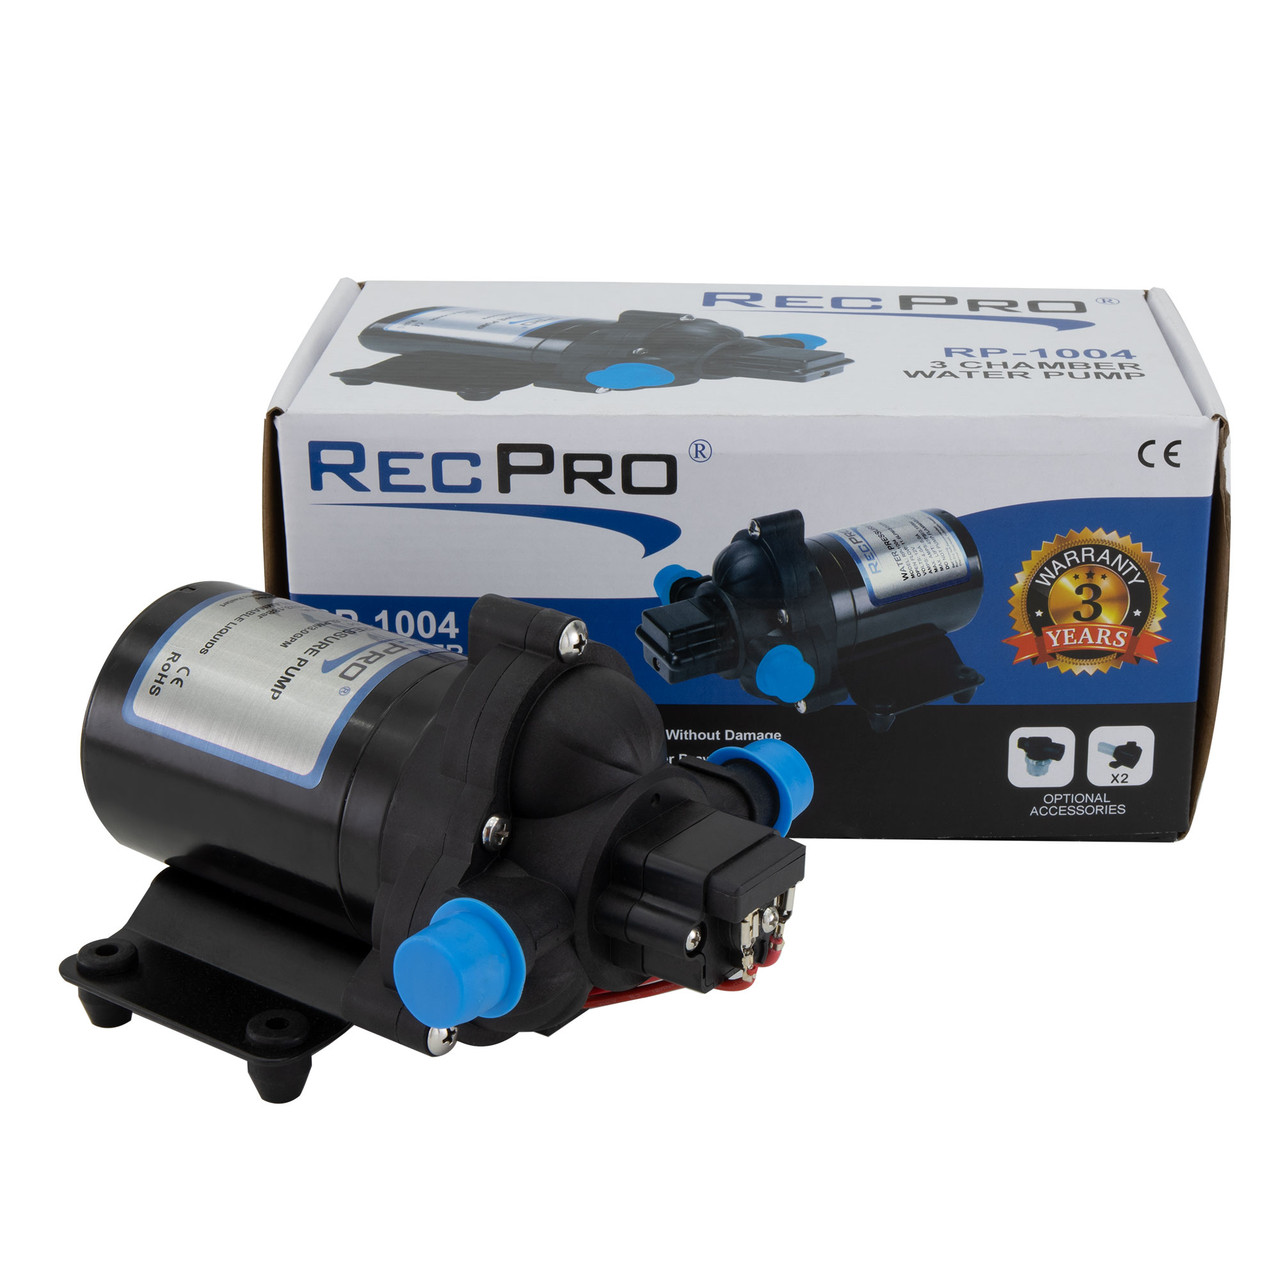 RecPro RV Water Pump 12V 3.0 Gpm Revolution # 4008-101-A65 Replacement 